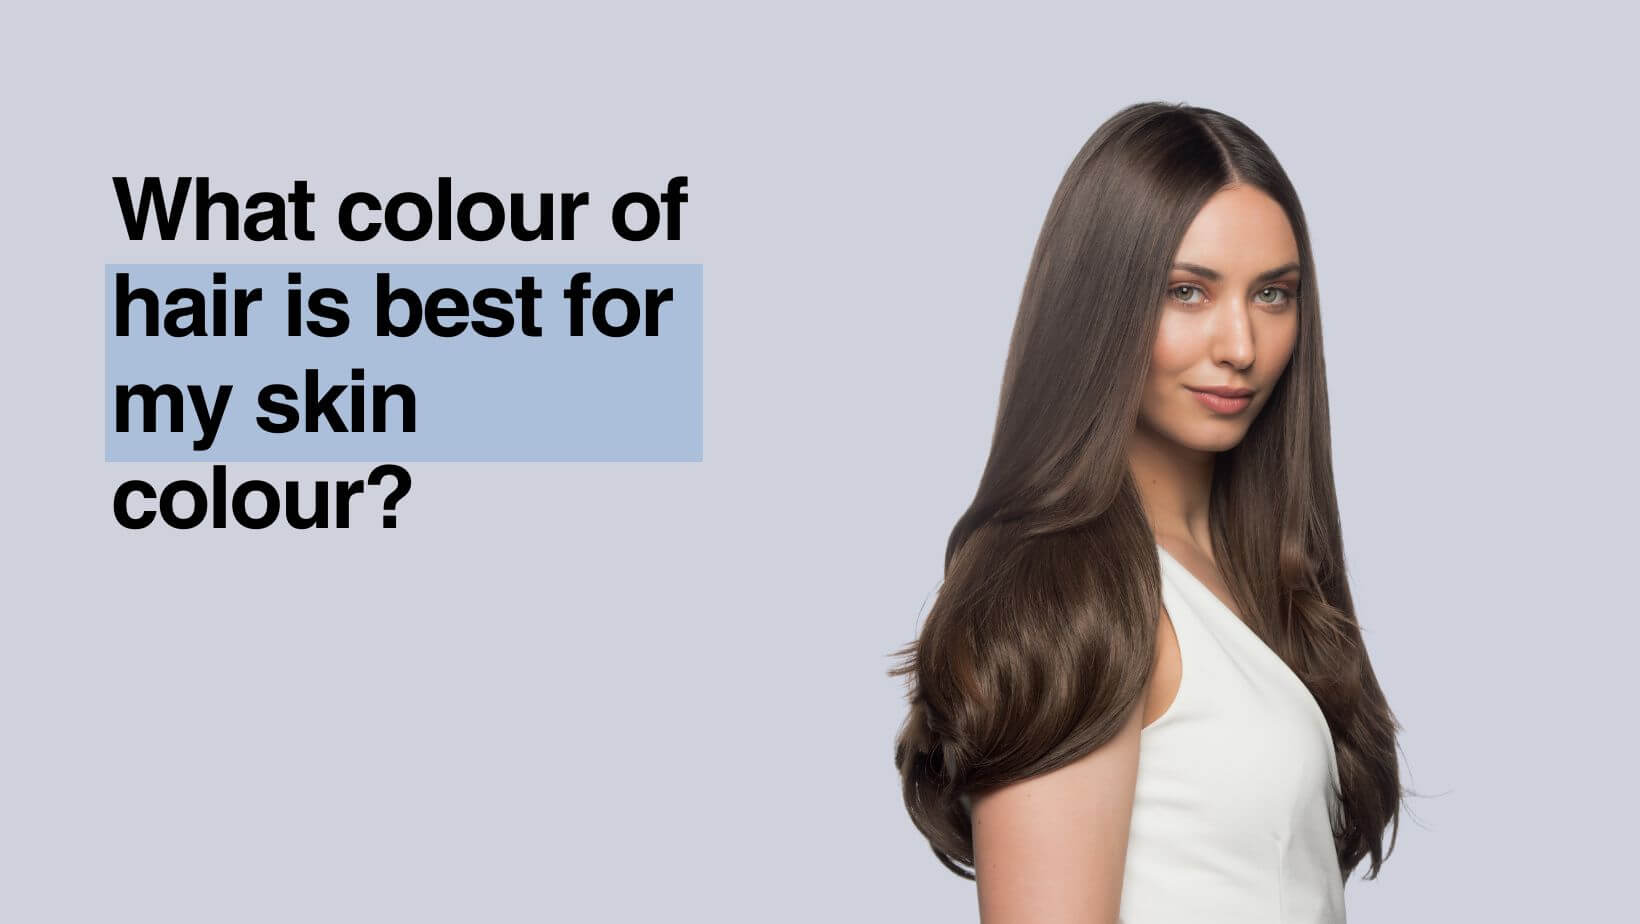 What colour of hair is best for my skin colour?